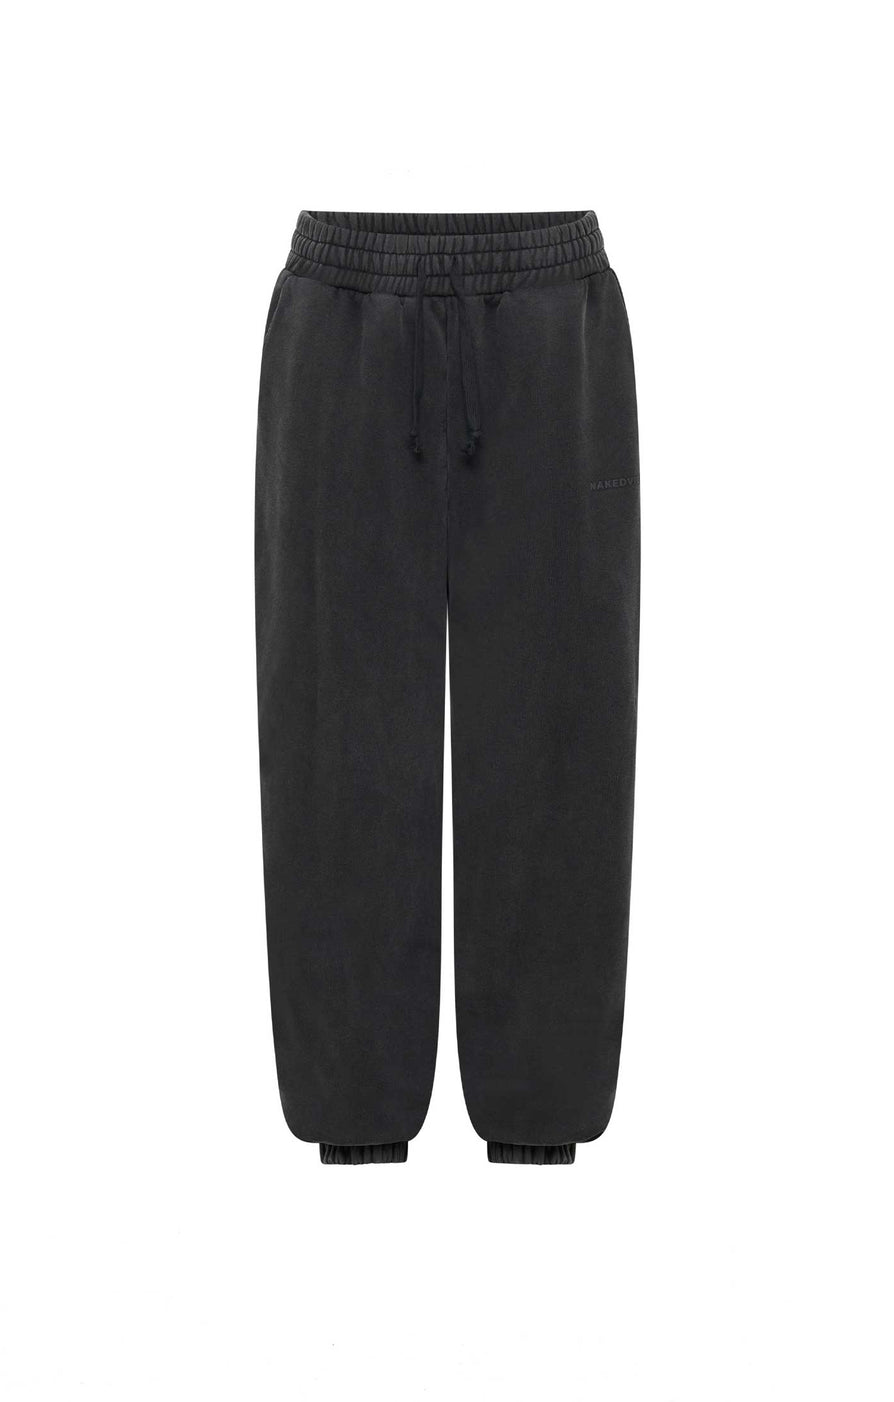 THE UNISEX BLACKWASH TRACKPANT | ghost